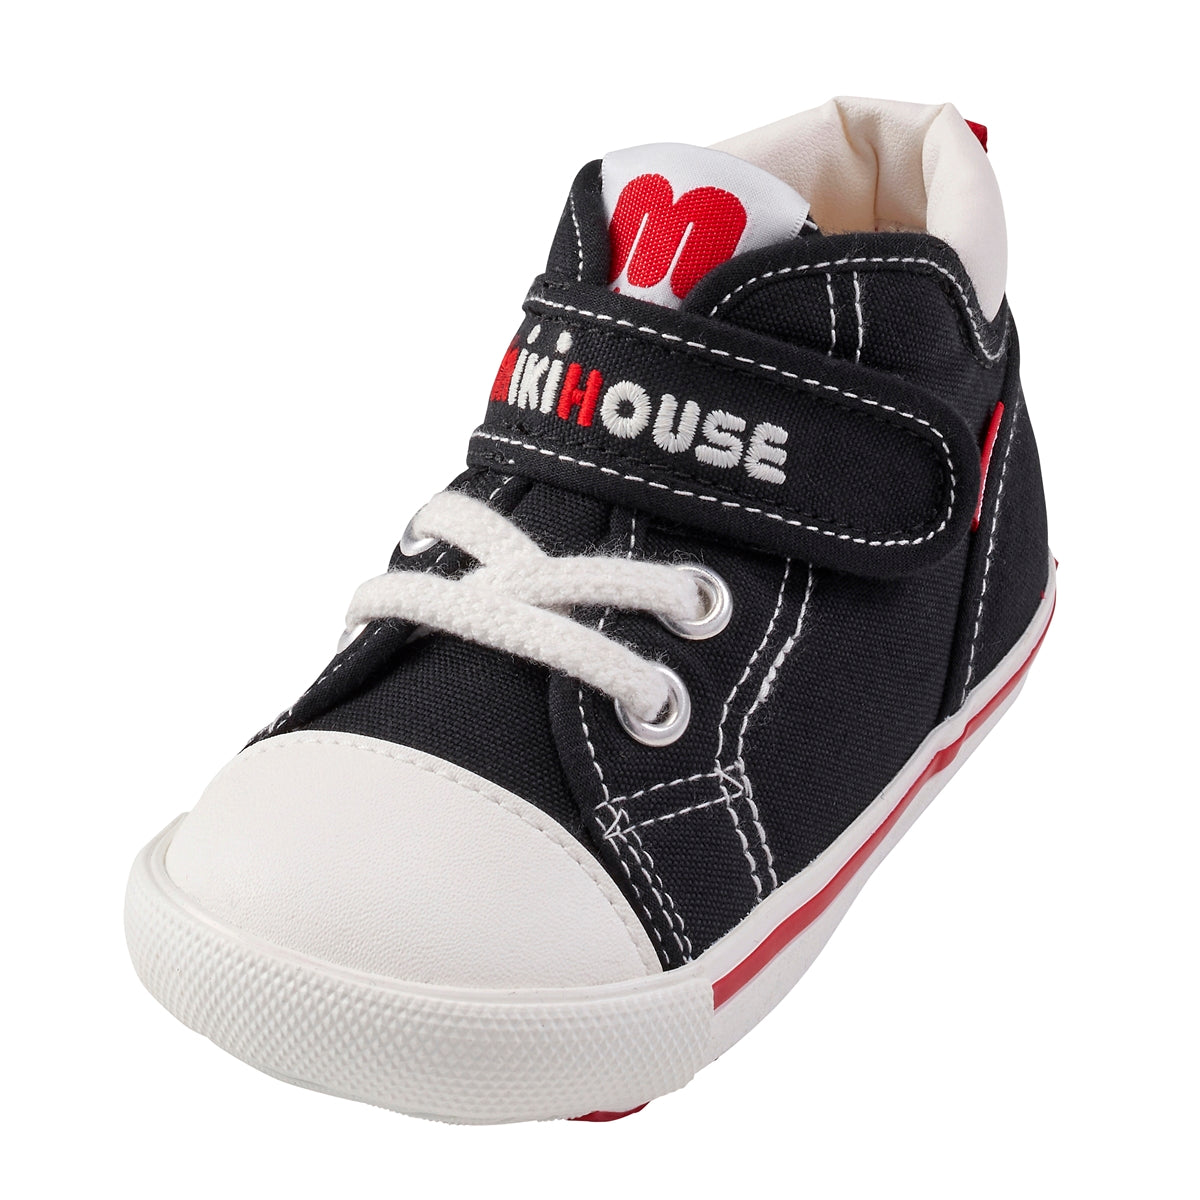 New! Classic High Top Second Shoes